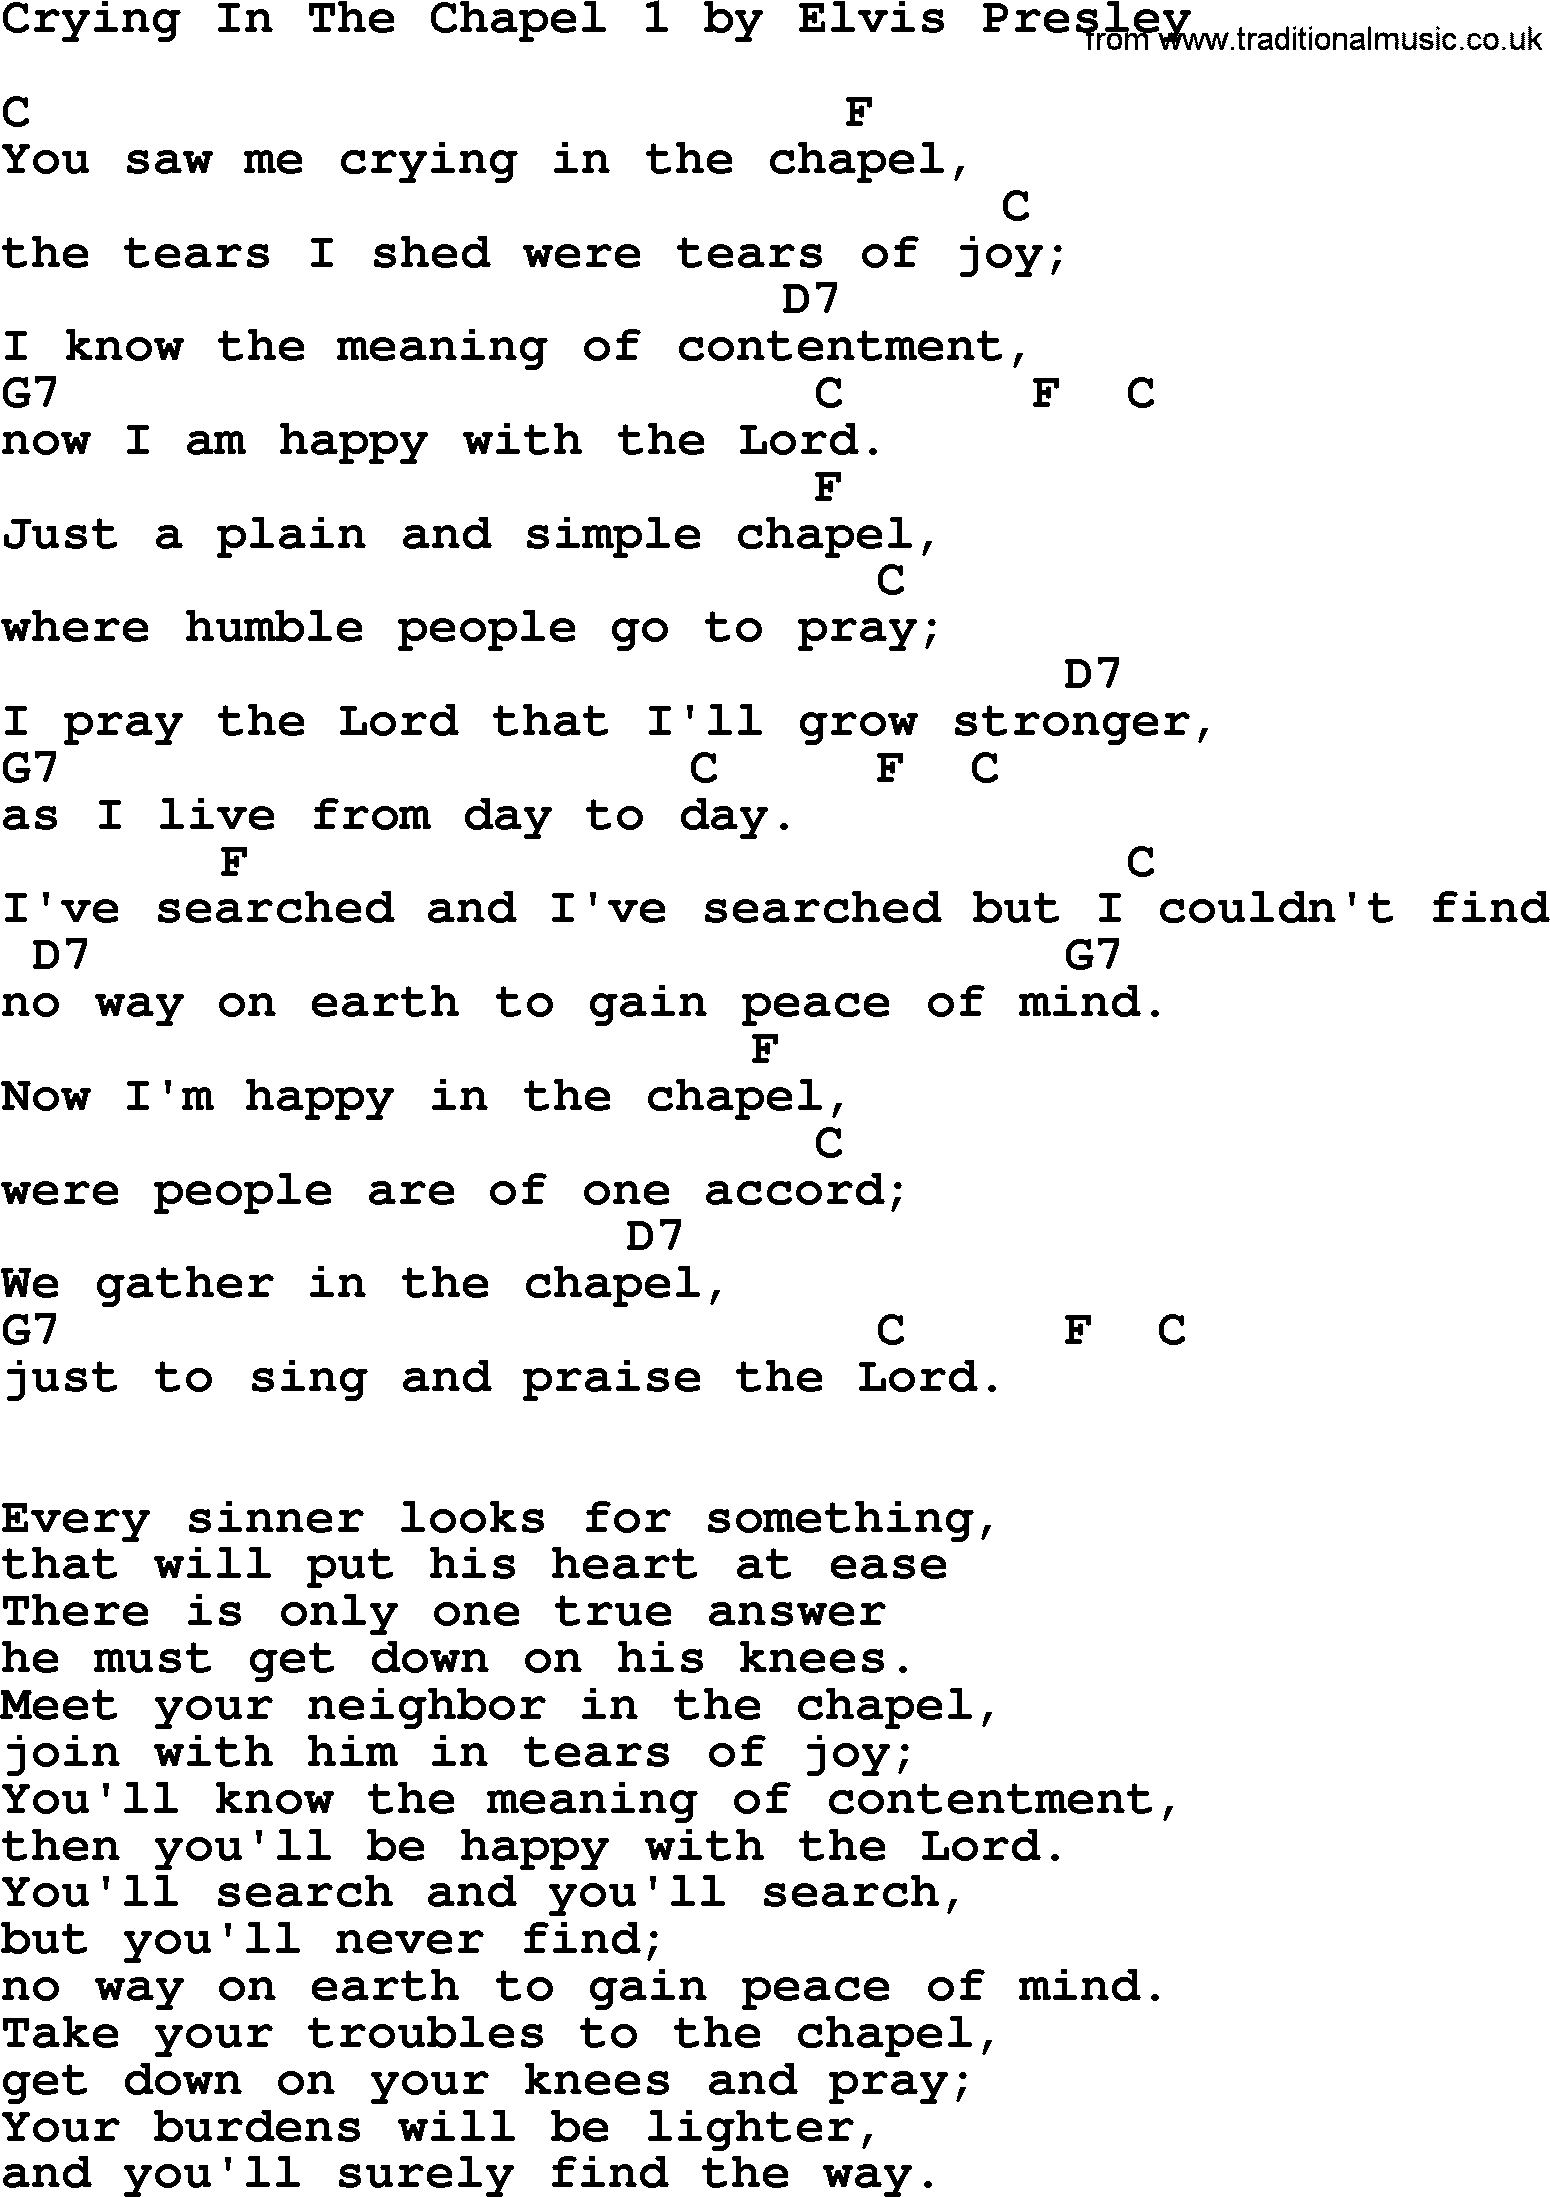 Elvis Presley song: Crying In The Chapel 1, lyrics and chords